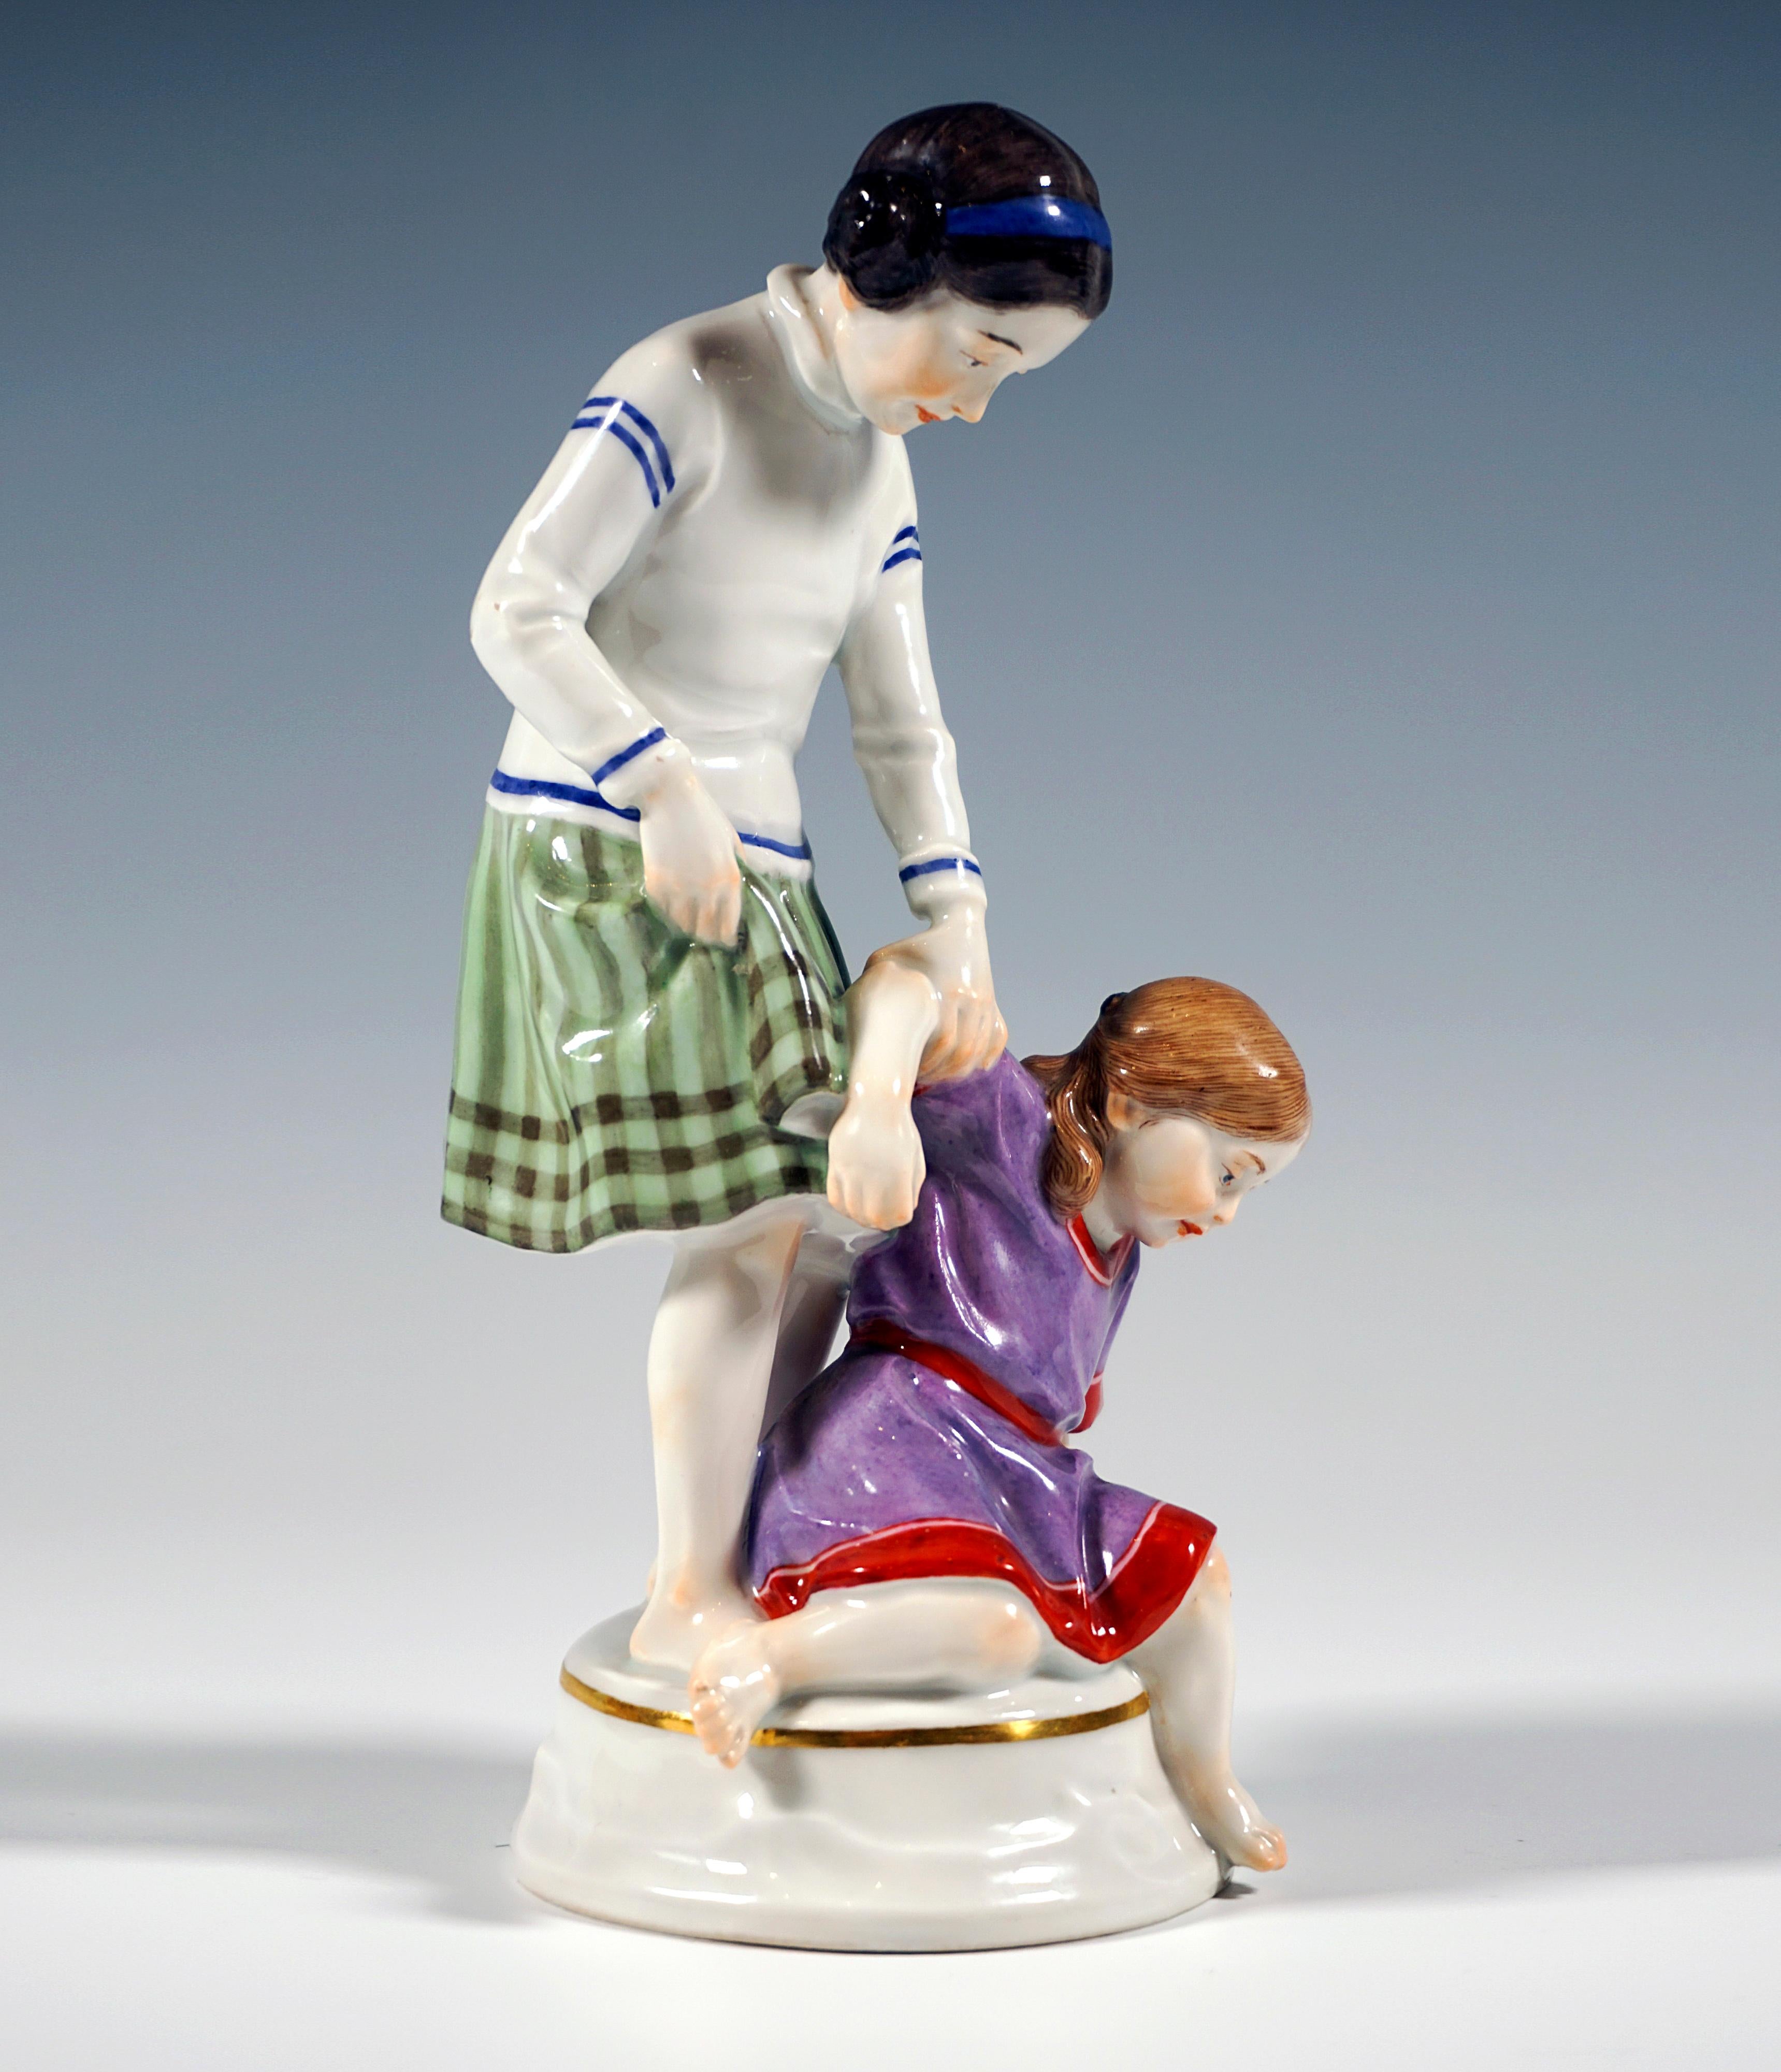 Very rare Meissen Art Nouveau porcelain figure group:
Two barefoot girls in summer clothes, the older one in a green-brown skirt and white long-sleeved shirt with blue stripes, her hair pinned up in two side bunches, the younger child in a